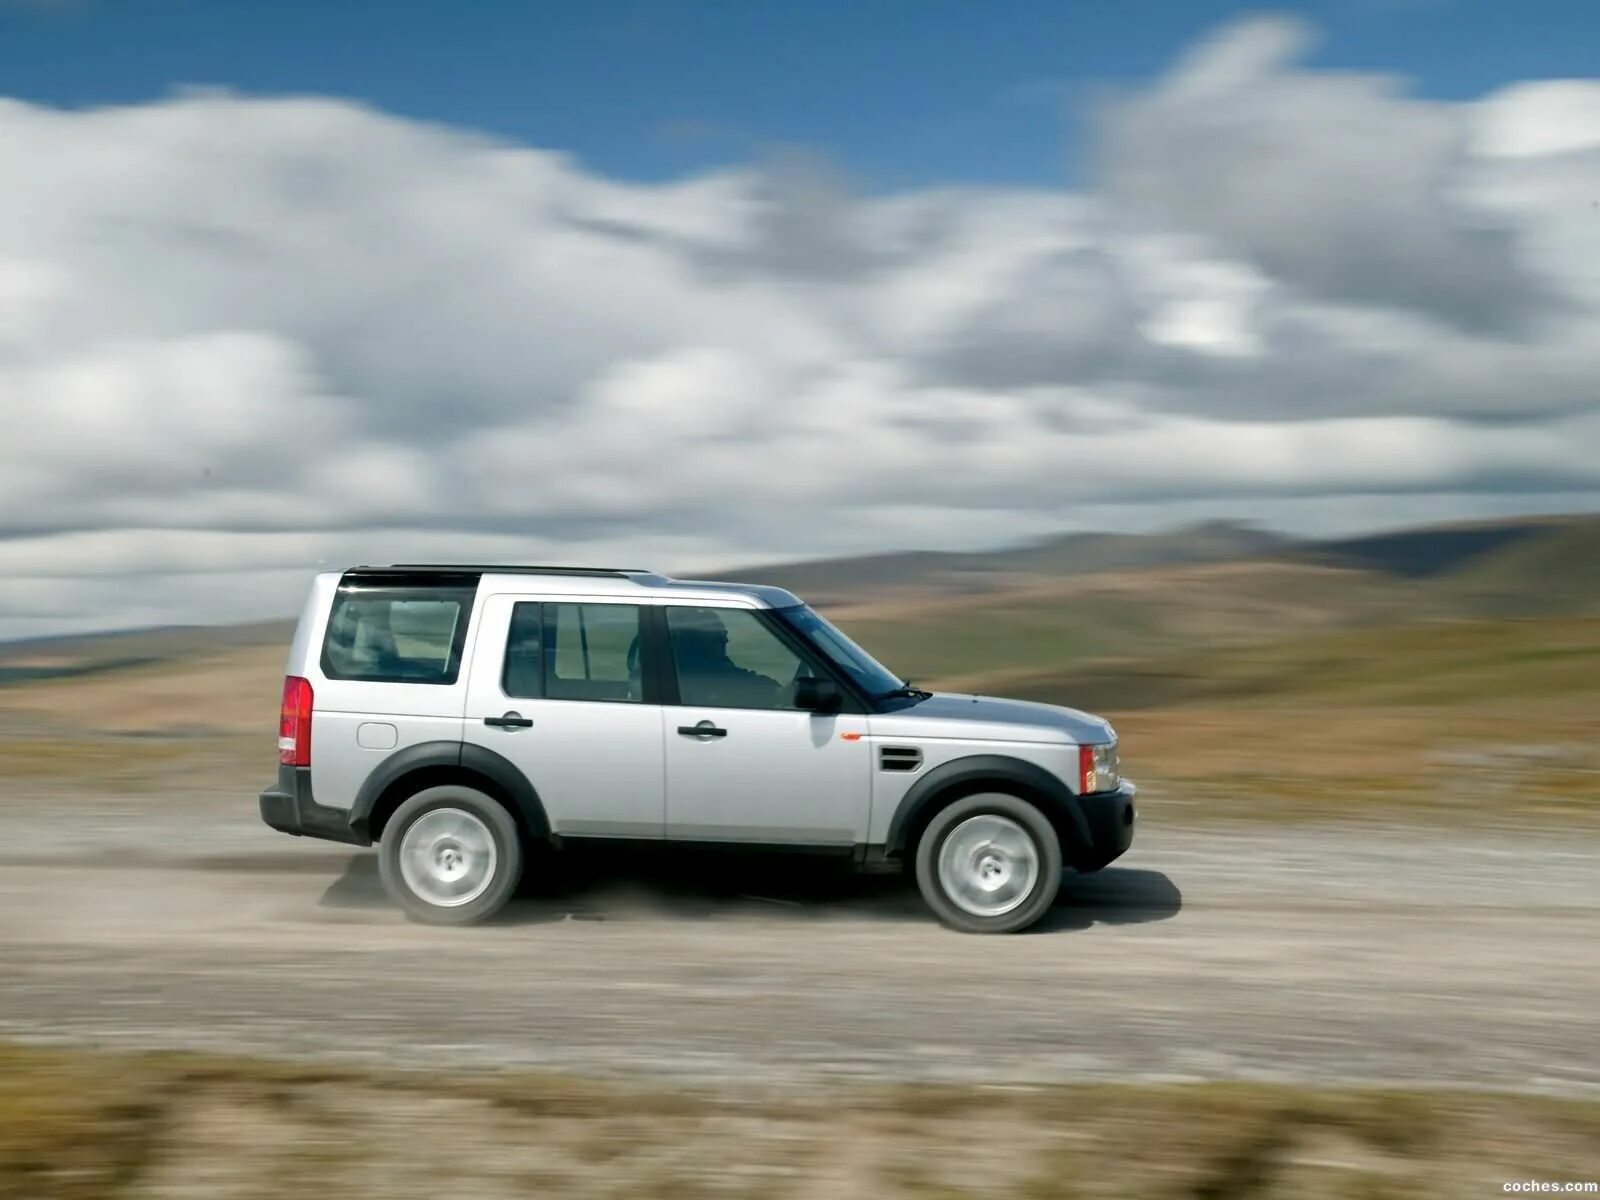 Land Rover Discovery 3. Land Rover Discovery 3 4.4 v8. Ленд Ровер Дискавери 2007. Land Rover Discovery 3 v8.